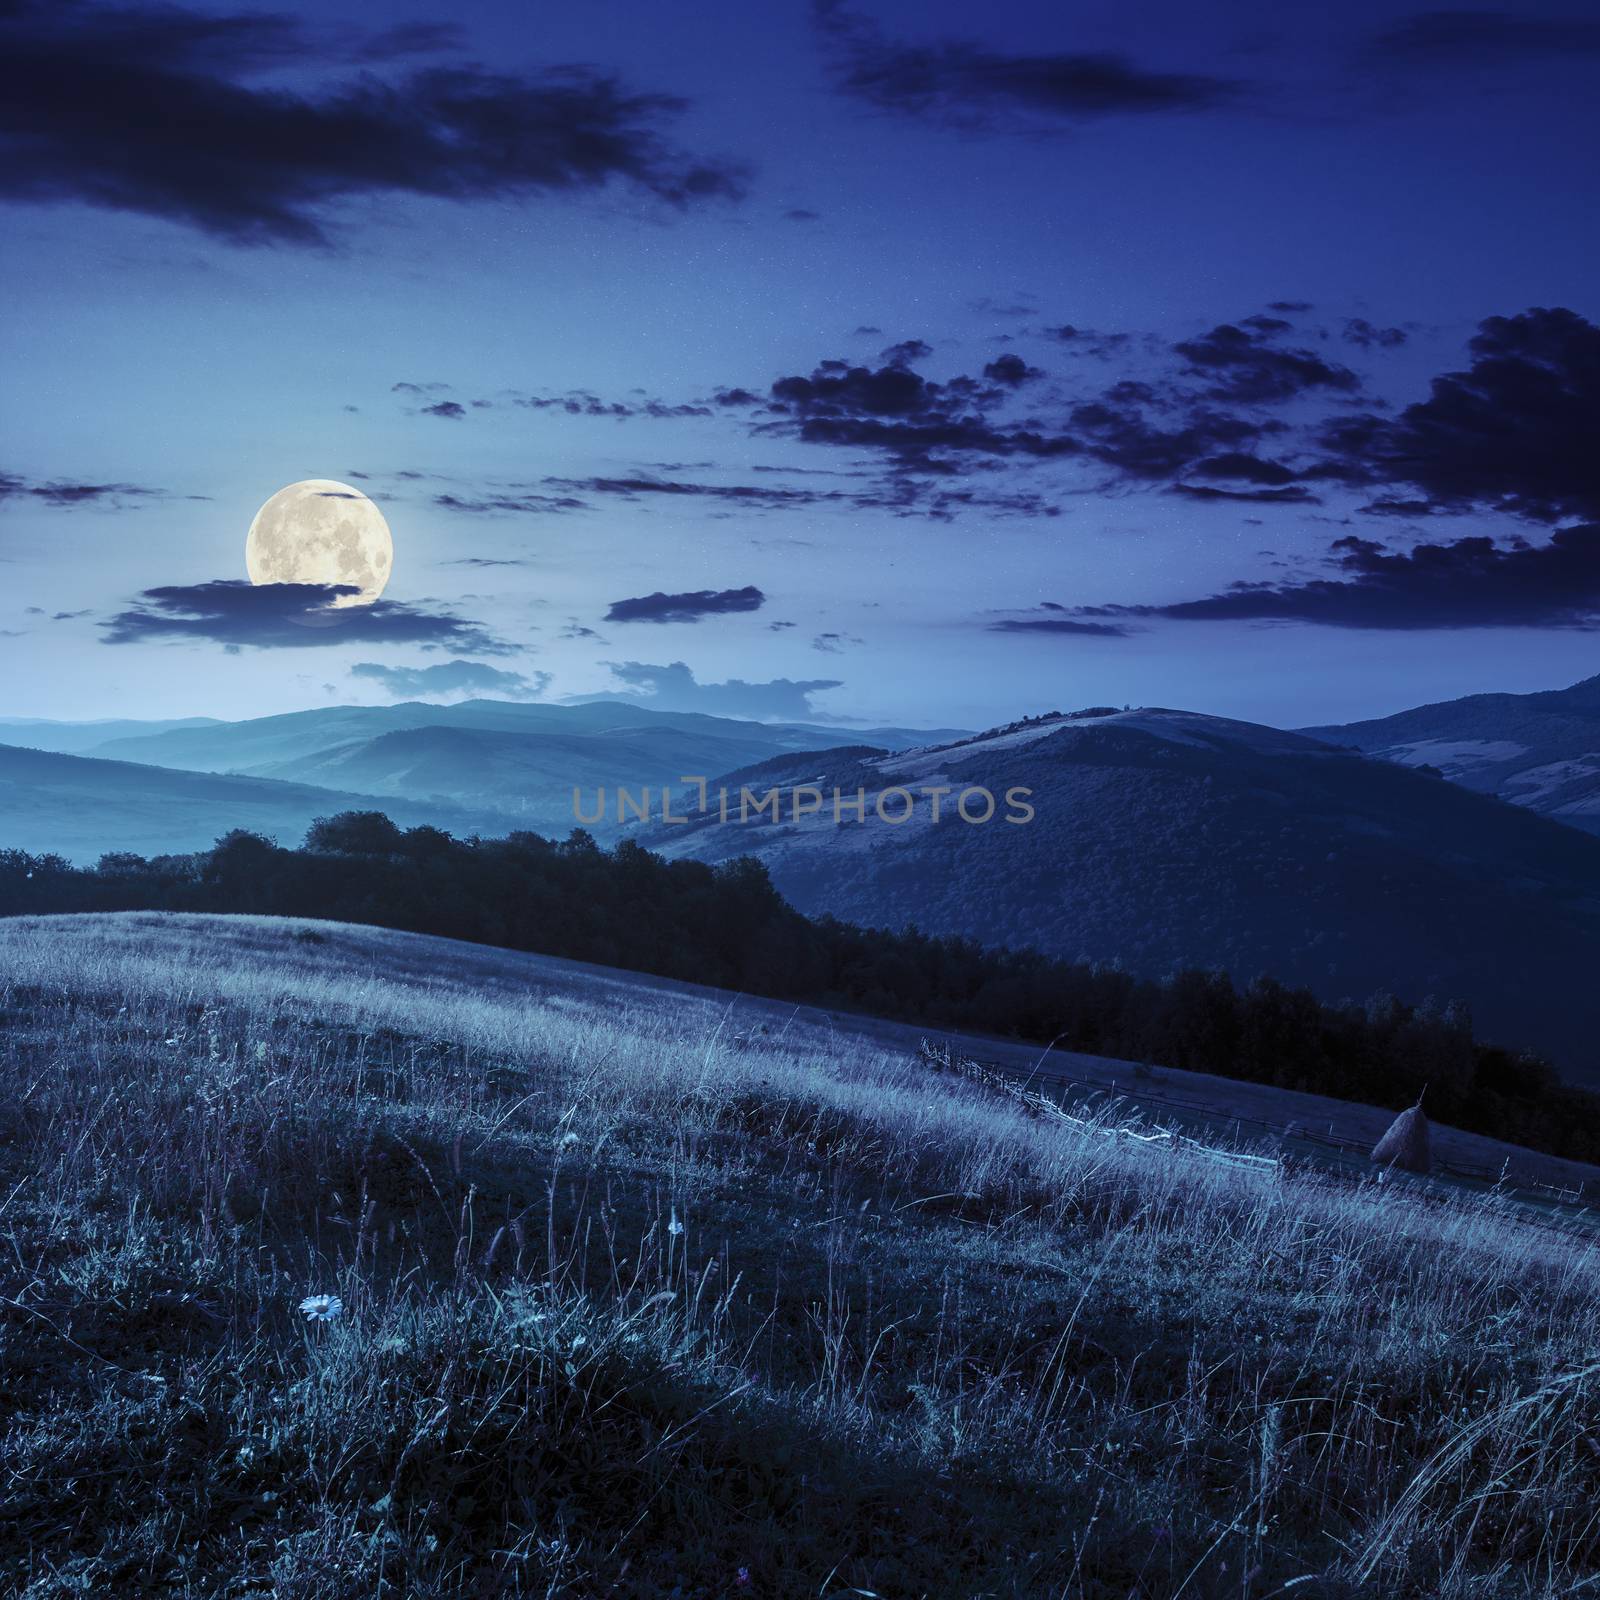 Stack of hay on a green meadow near the village in mountains at night in full moon light